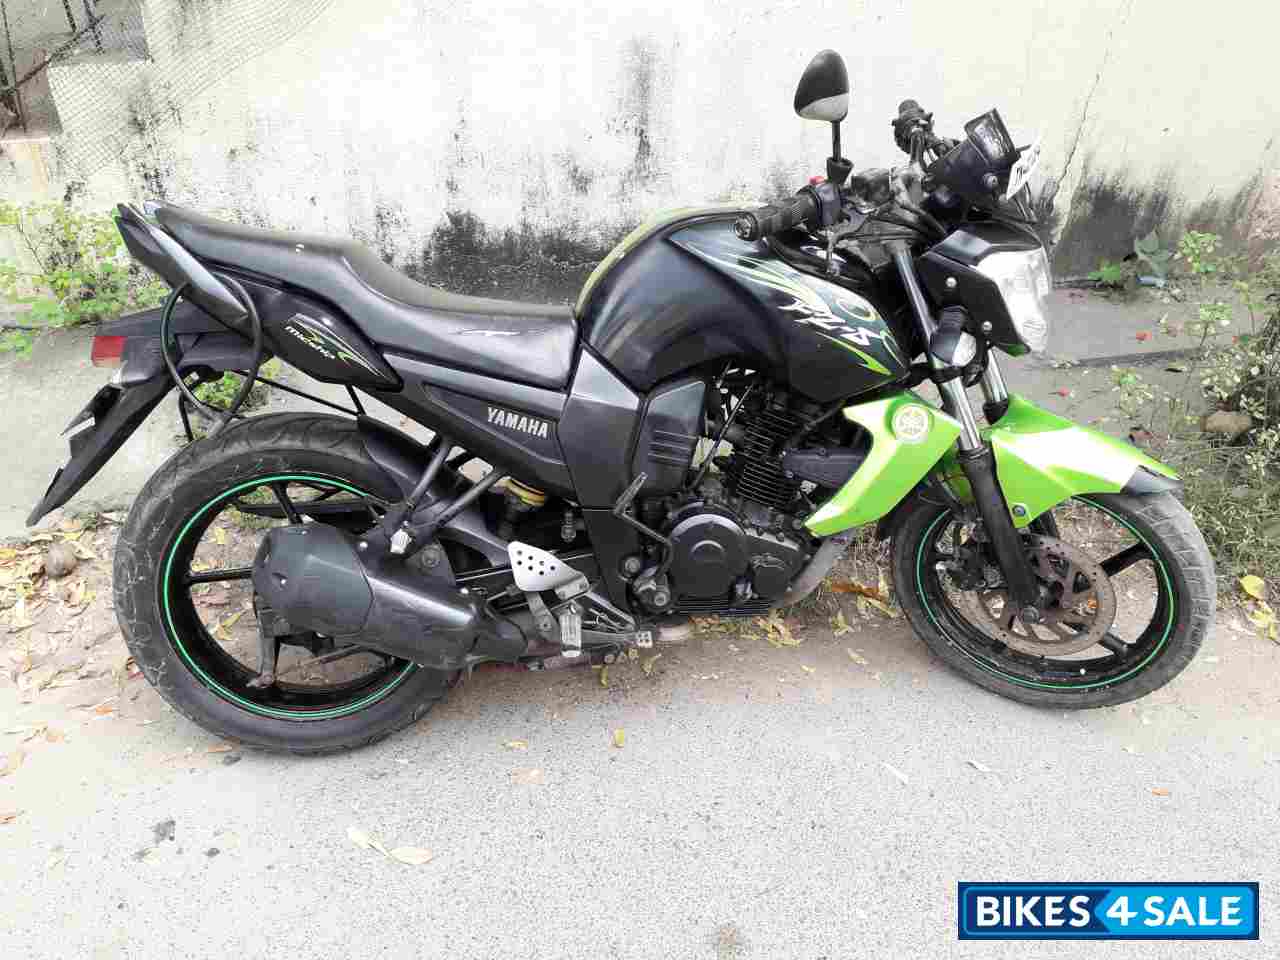 Used 2012 model Yamaha FZ-S for sale in Chennai. ID 308023 ...